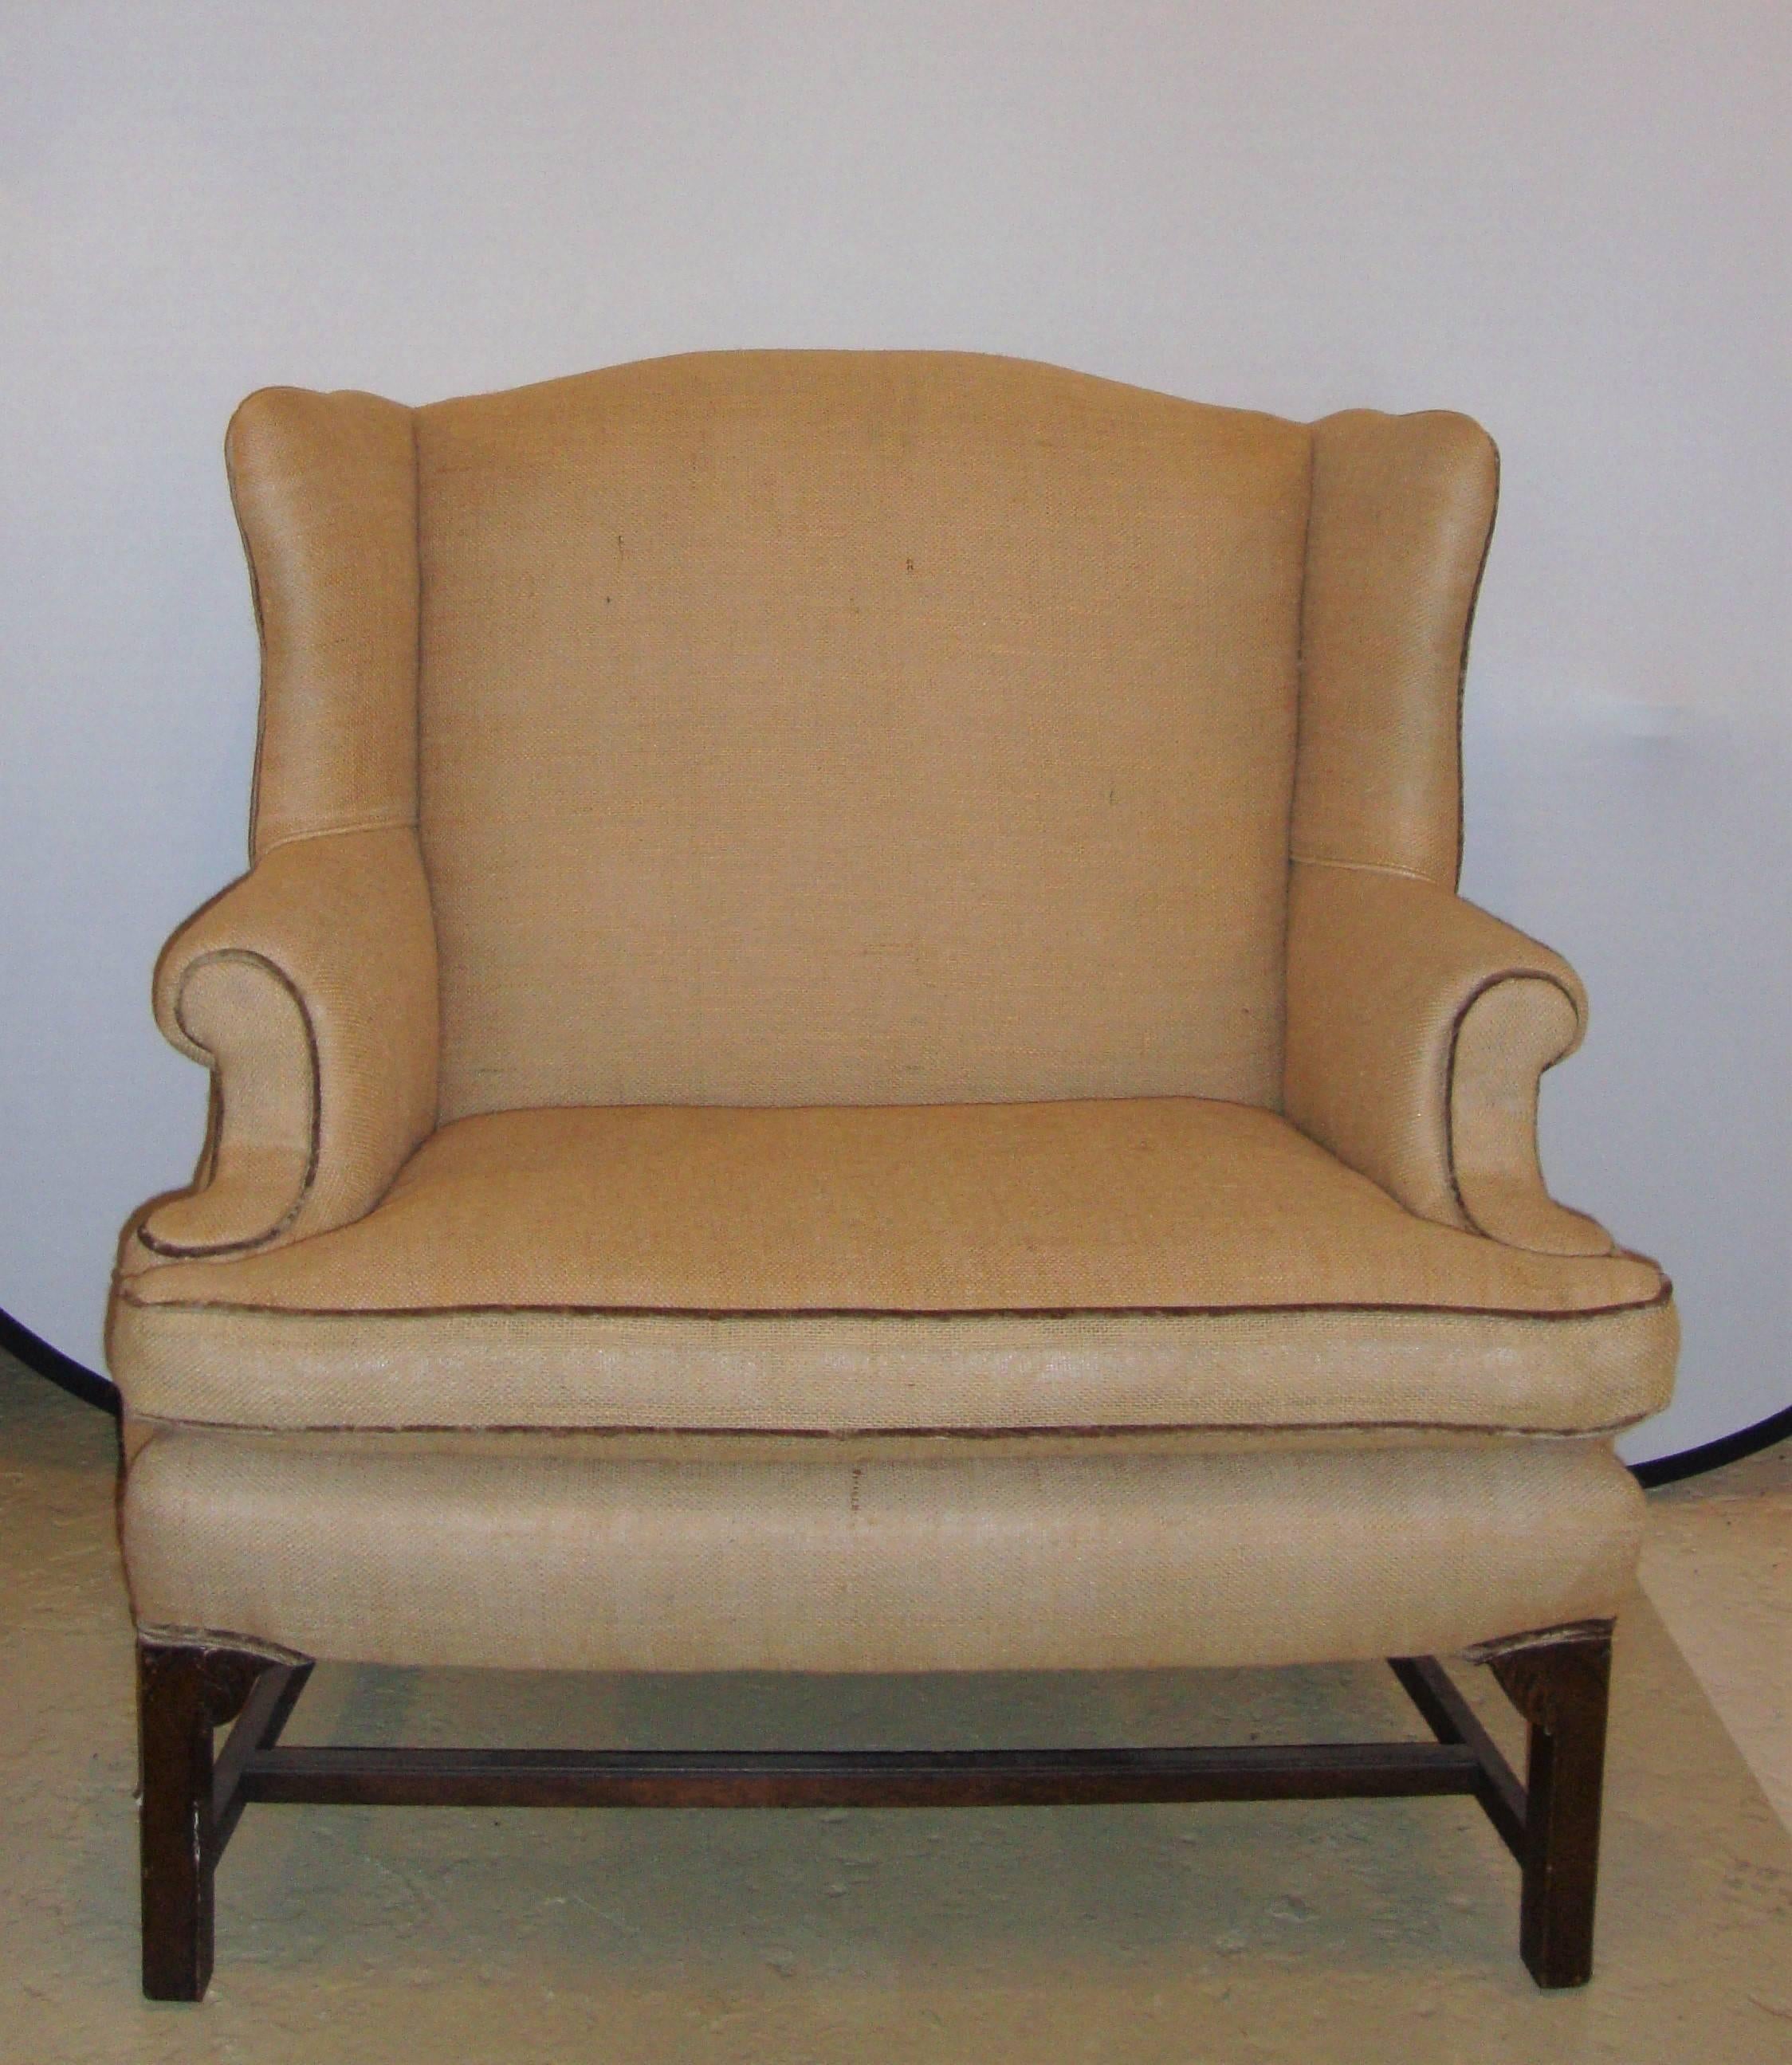 This gorgeous Mid-Century style settee, has a shaped back and is upholstered in a burlap fabric. This piece will be gorgeous in your entry hall, living room, bedroom or den.